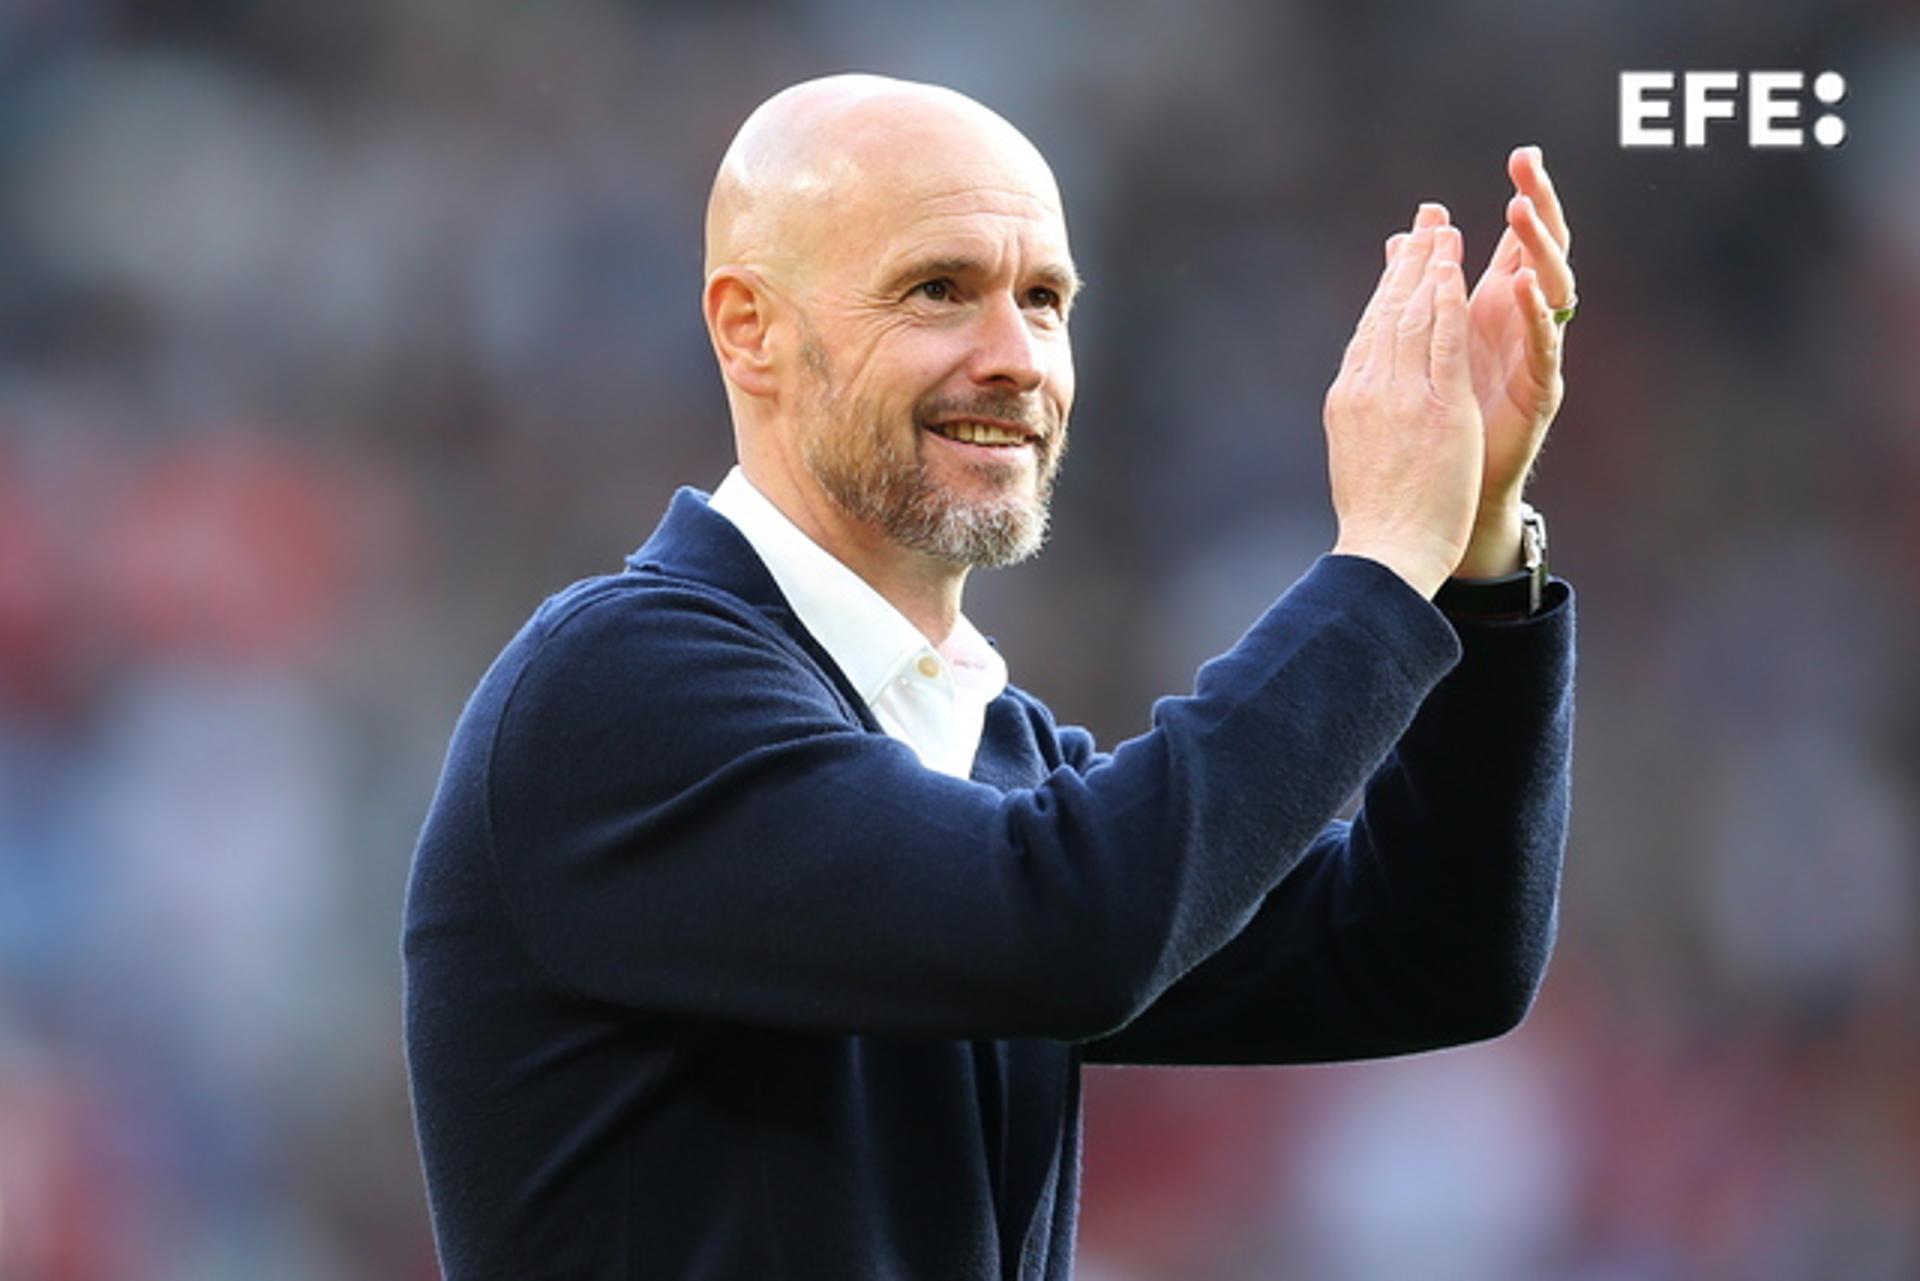 Manchester (United Kingdom), 28/05/2023.- Manchester United manager Erik ten Hag thanks the home crowd after the English Premier League soccer match between Manchester United and Fulham FC, in Manchester, England, 28 May 2023. EFE/EPA/ASH ALLEN EDITORIAL USE ONLY. No use with unauthorized audio, video, data, fixture lists, club/league logos or 'live' services. Online in-match use limited to 120 images, no video emulation. No use in betting, games or single club/league/player publications.
